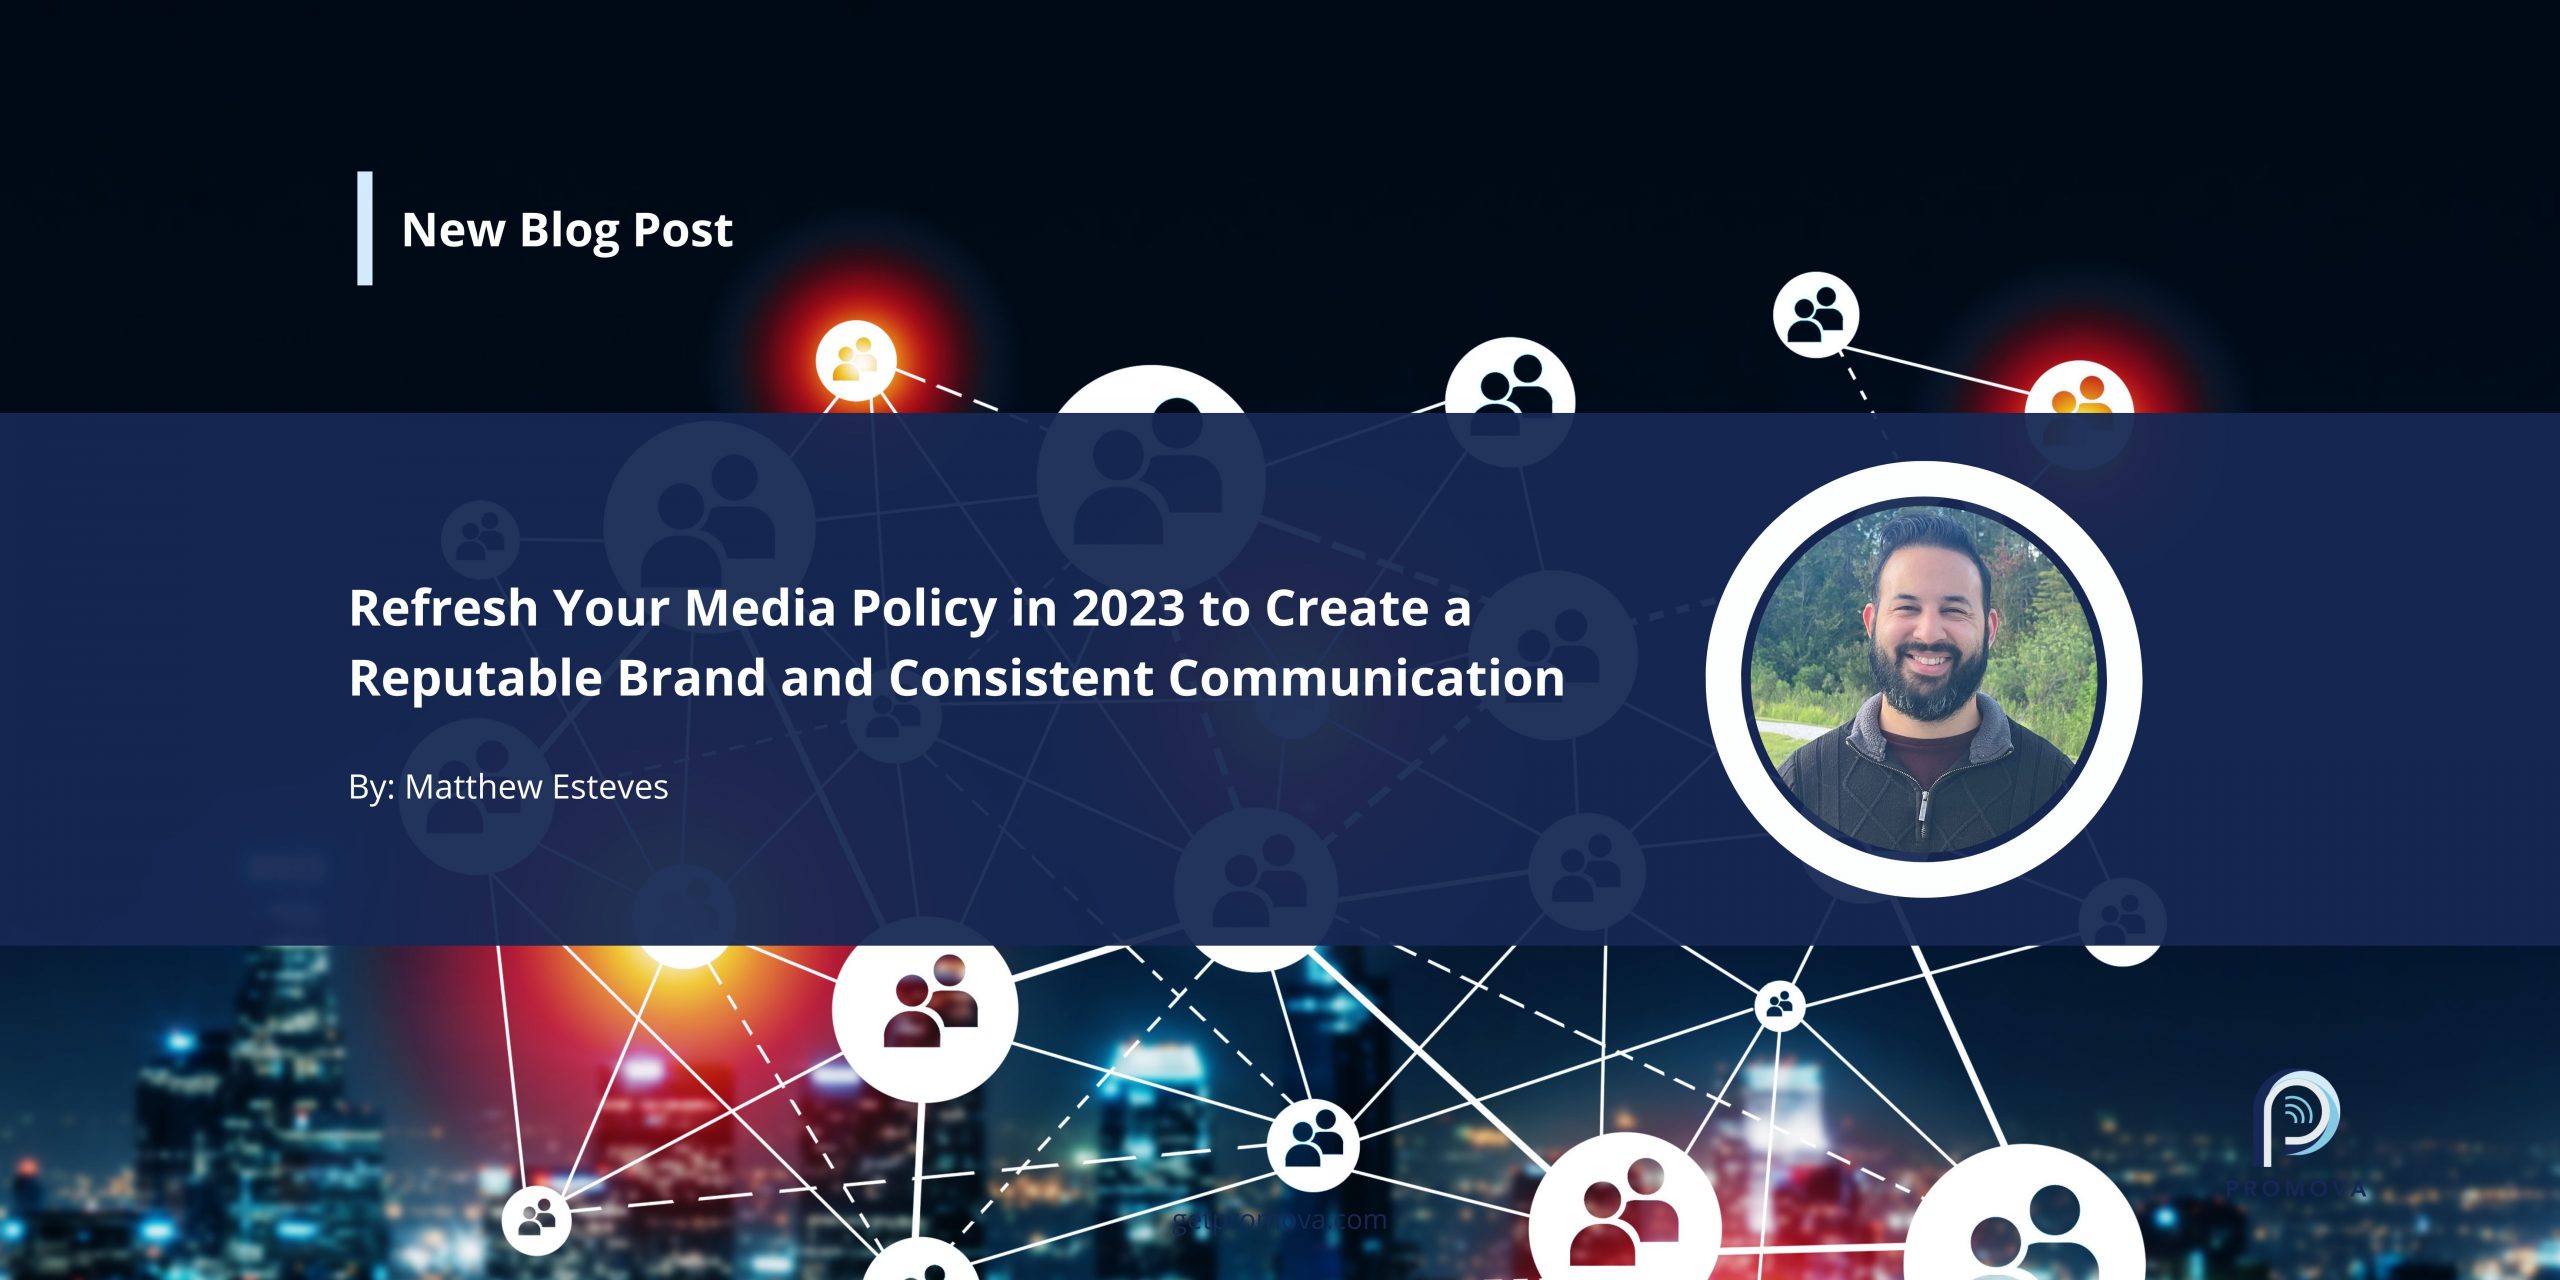 Featured image for “Refresh Your Media Policy in 2023 to Create a Reputable Brand and Consistent Communication”